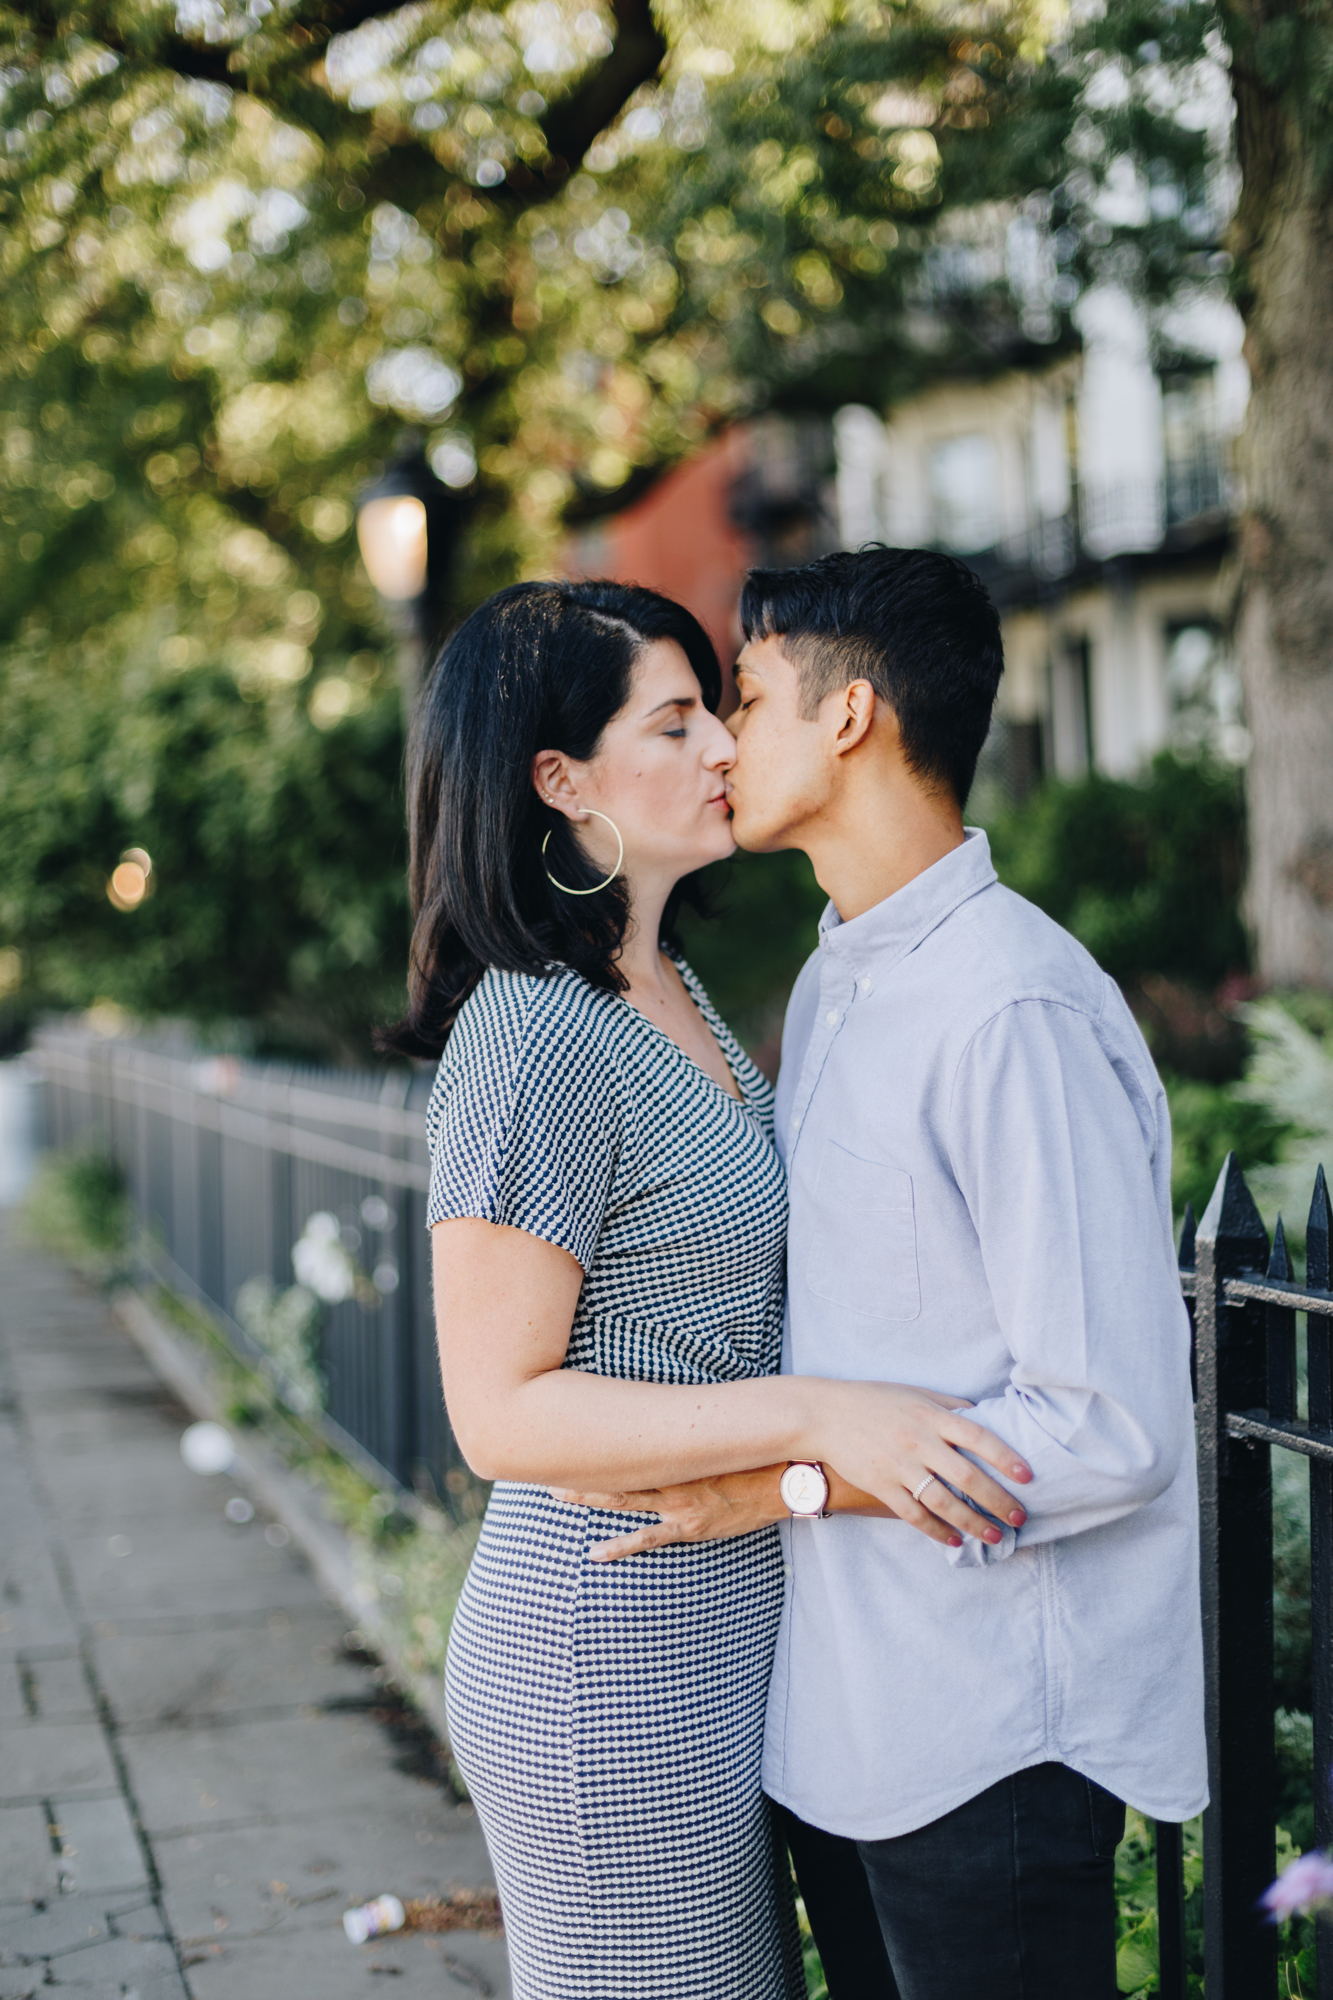 Magical Brooklyn Heights Promenade Engagement Photos in Summery New York